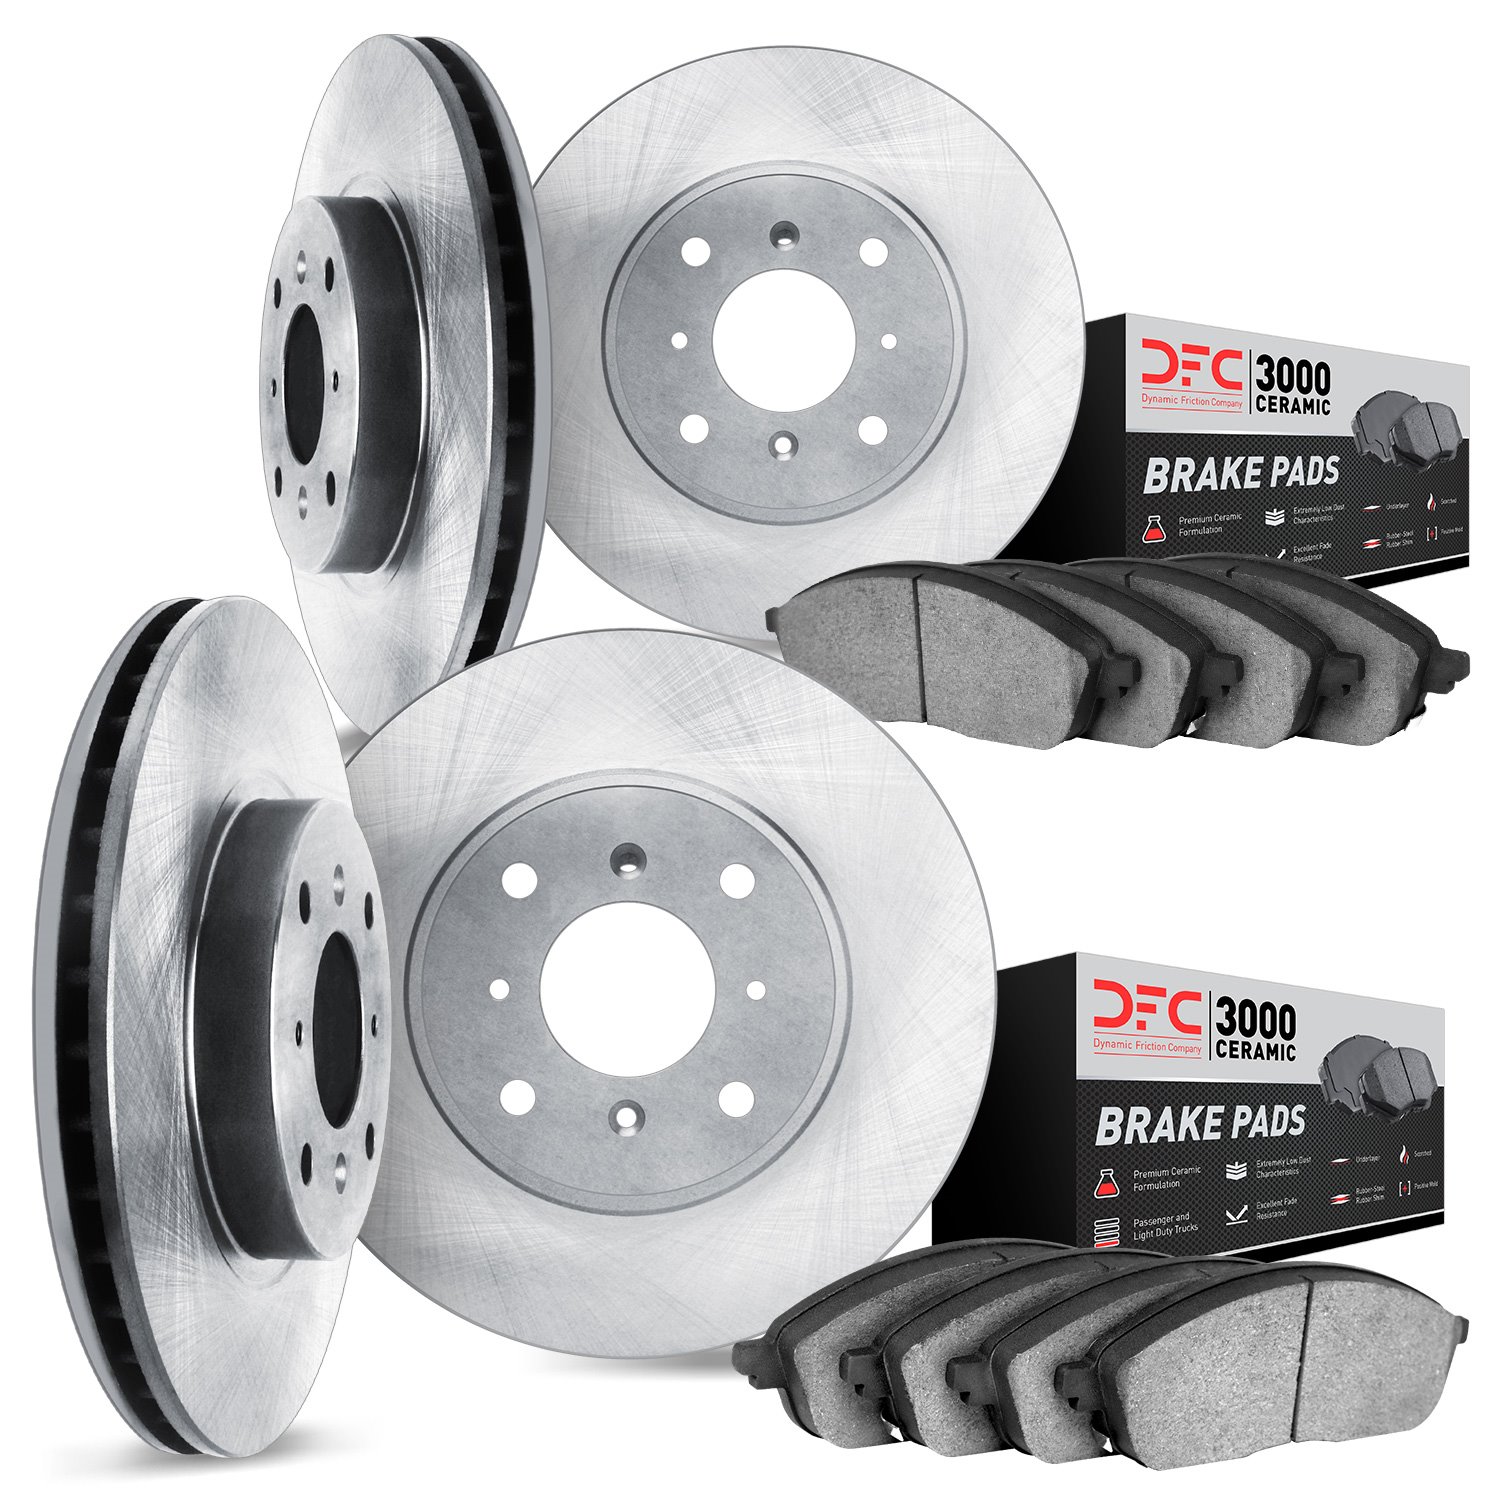 6304-76003 Brake Rotors with 3000-Series Ceramic Brake Pads Kit, 1985-1988 Lexus/Toyota/Scion, Position: Front and Rear